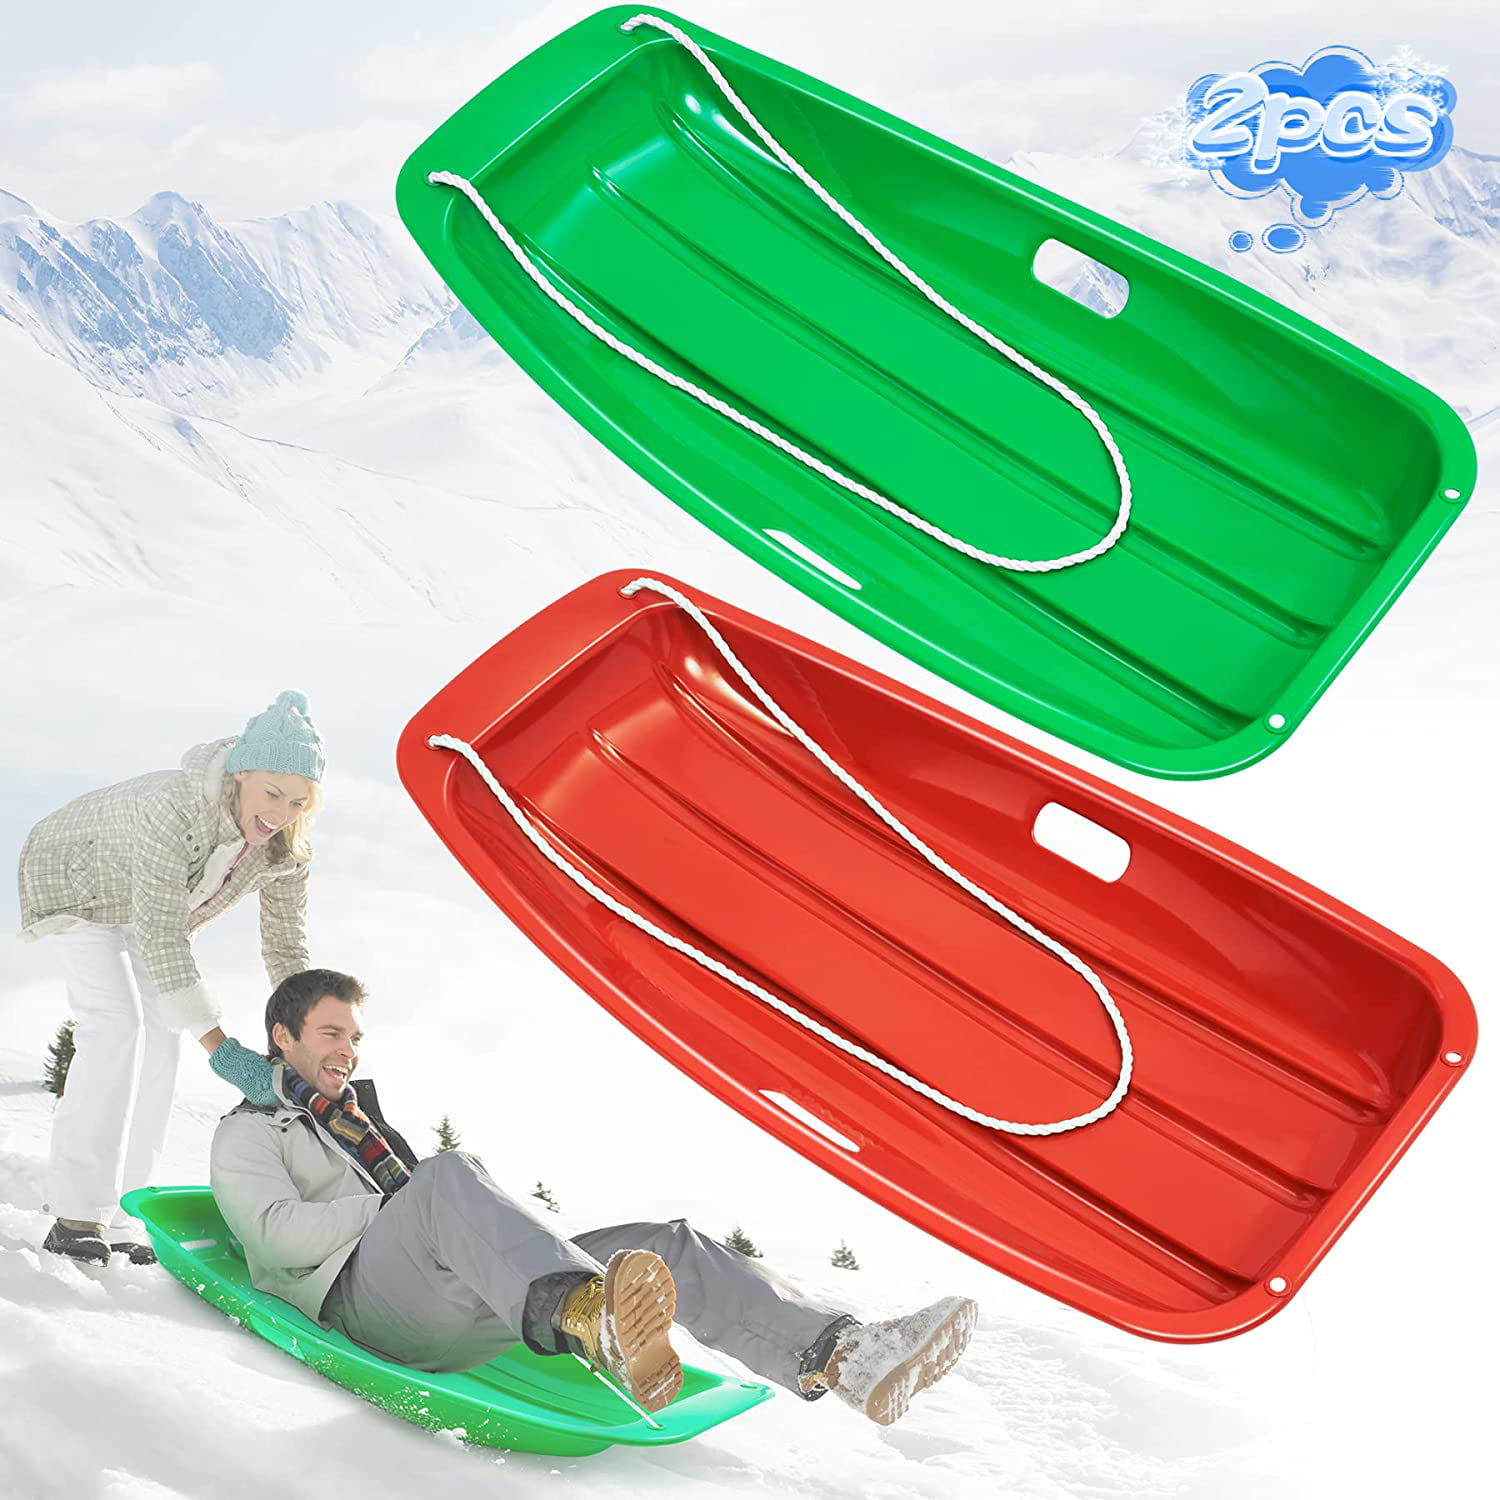 Snow Sledge Toboggan Top Quality with Rope Handle Lightweight Heavy Duty Plastic 